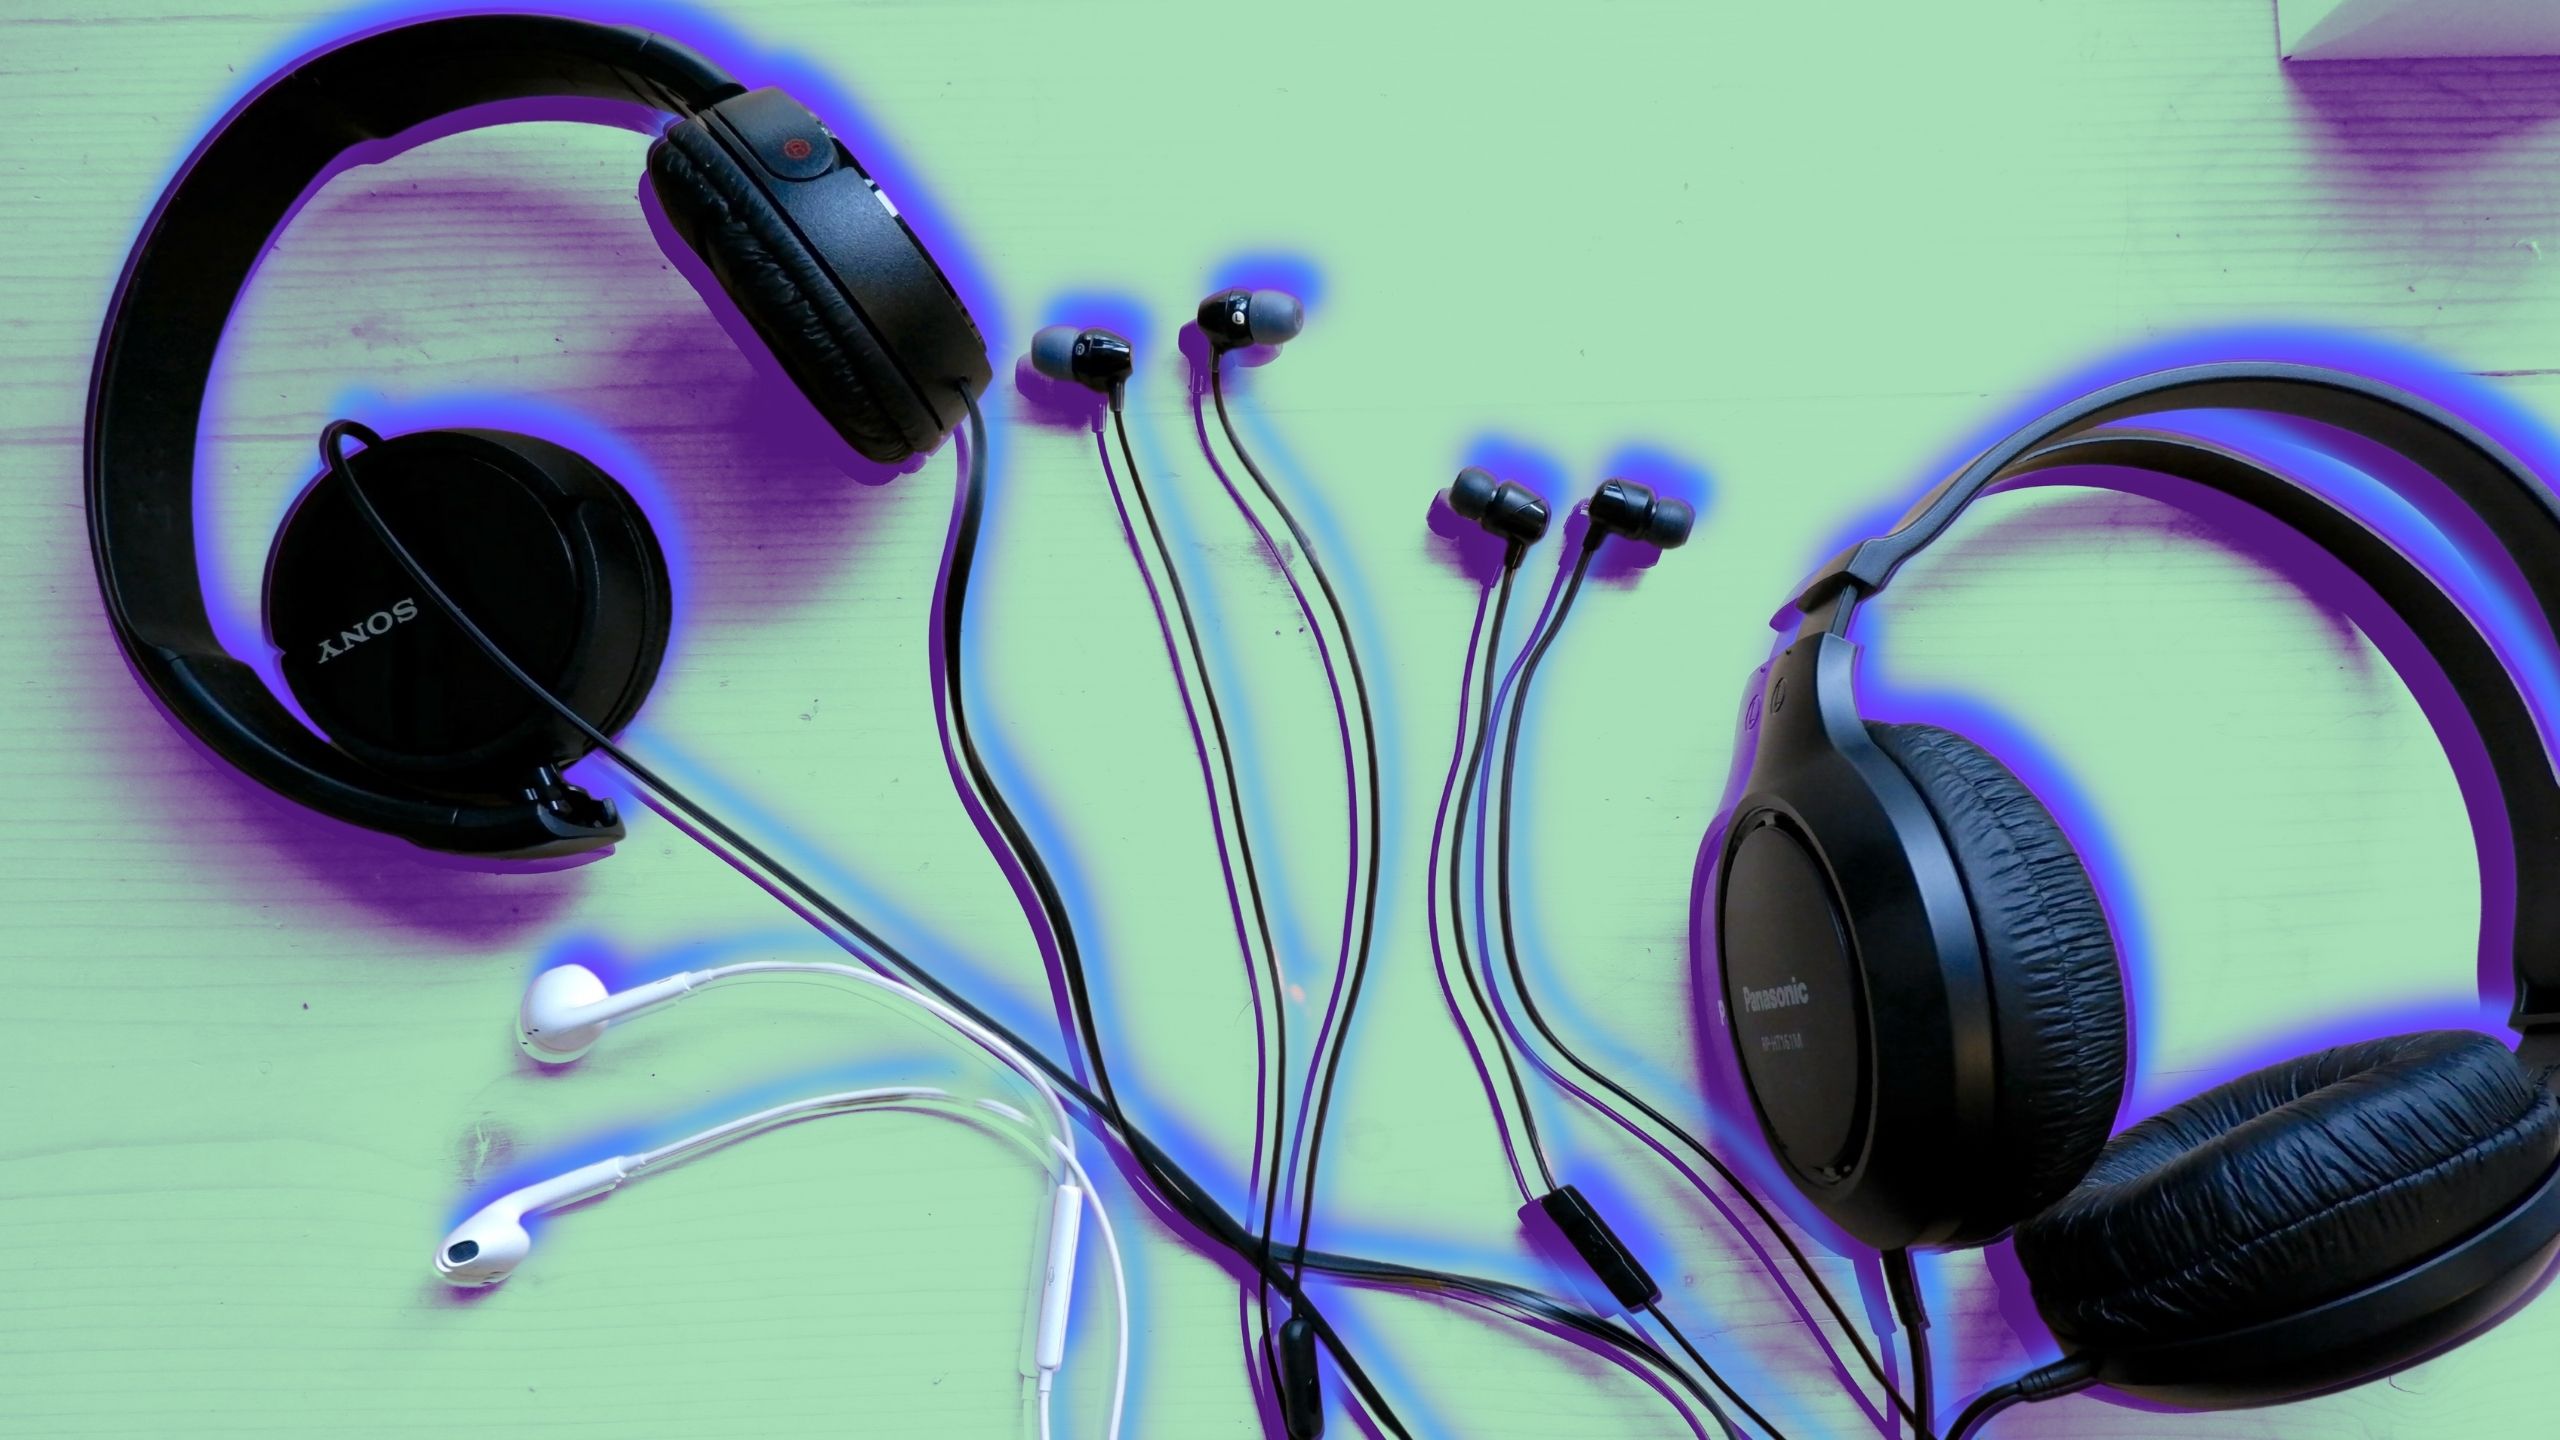 Different pairs of headphones with a purple and blue overlay